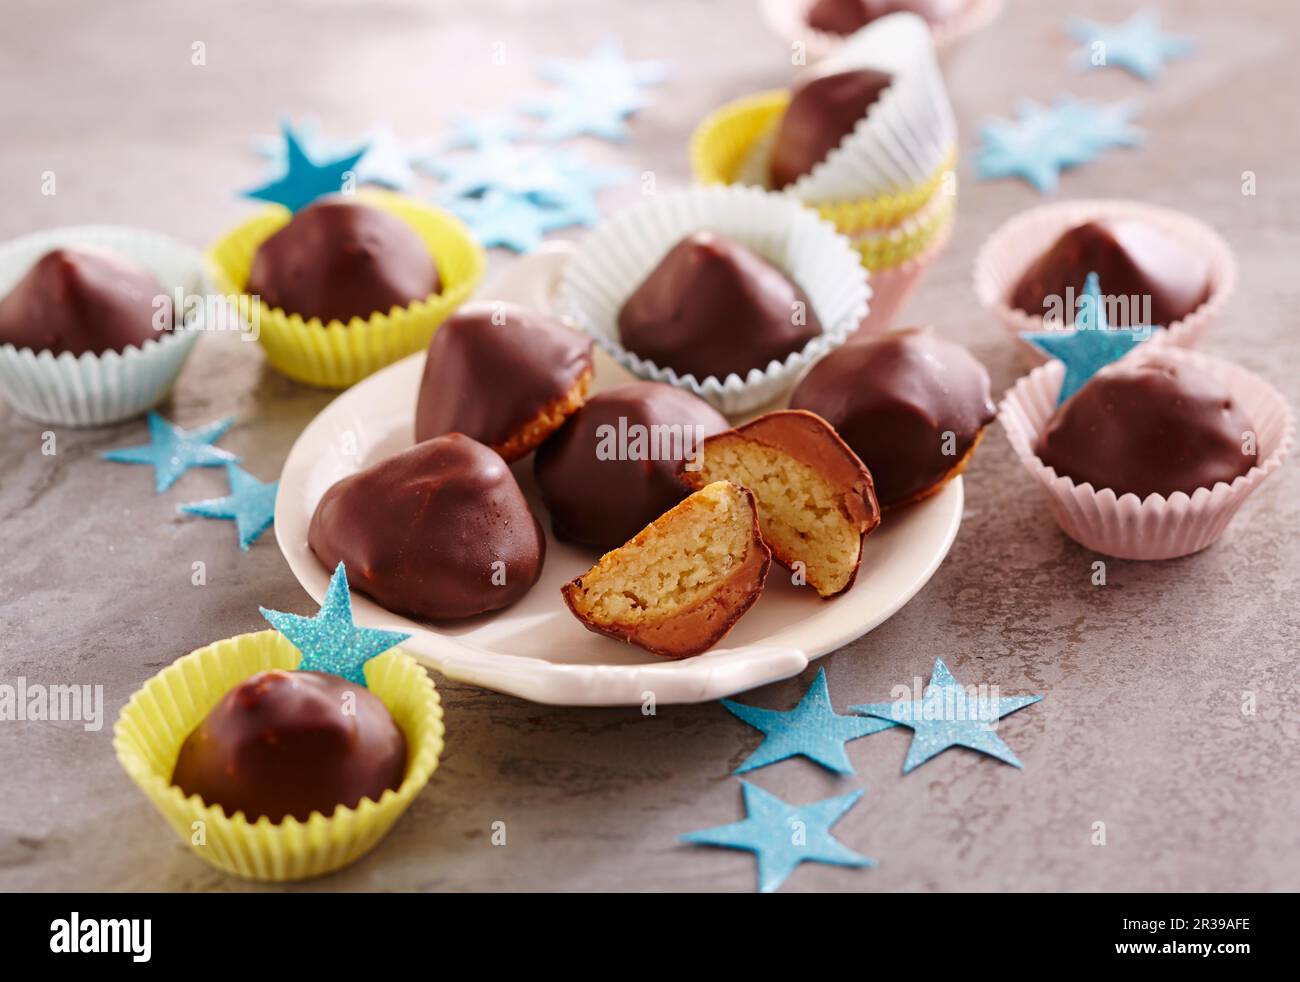 Crailsheimerle (Christmas sweets from Baden Wurttemburg) with a marzipan filling and chocolate glaze Stock Photo